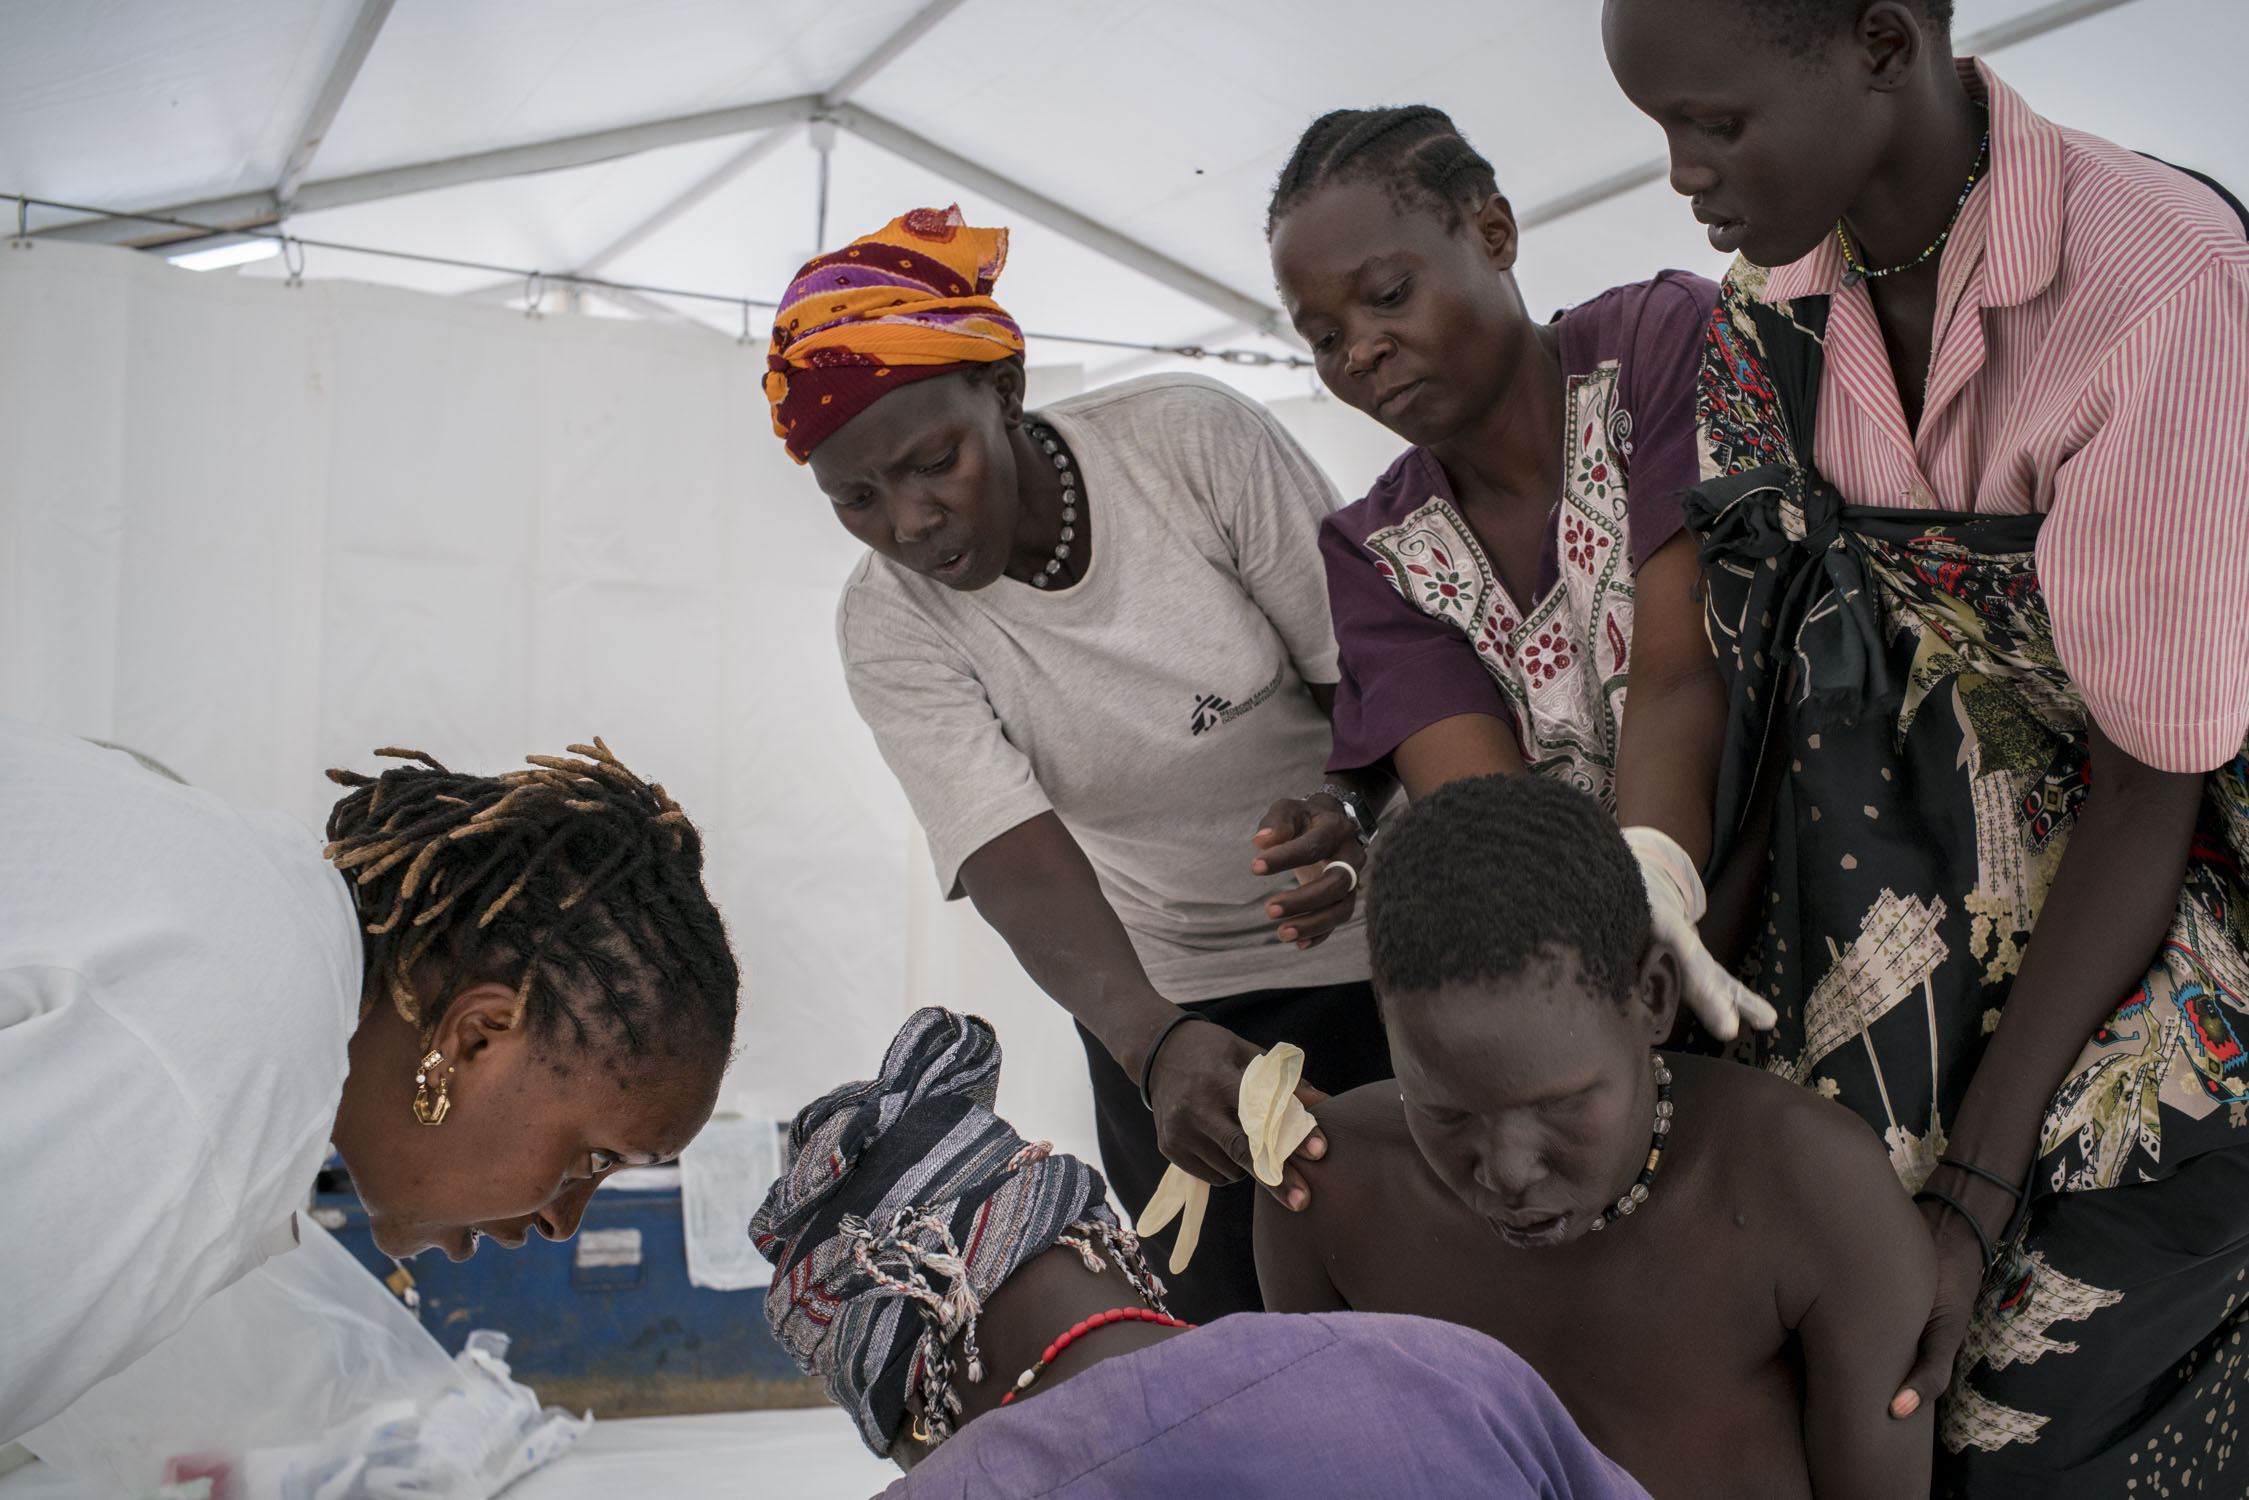  After an extremely difficult labor, a woman delivers her eighth child on her knees,&nbsp;assisted by a midwife,&nbsp;Rebecca, and her four assistants in a MSF hospital tent in the internally displaced persons (IDPs) camp in Bentiu. South Sudan has t